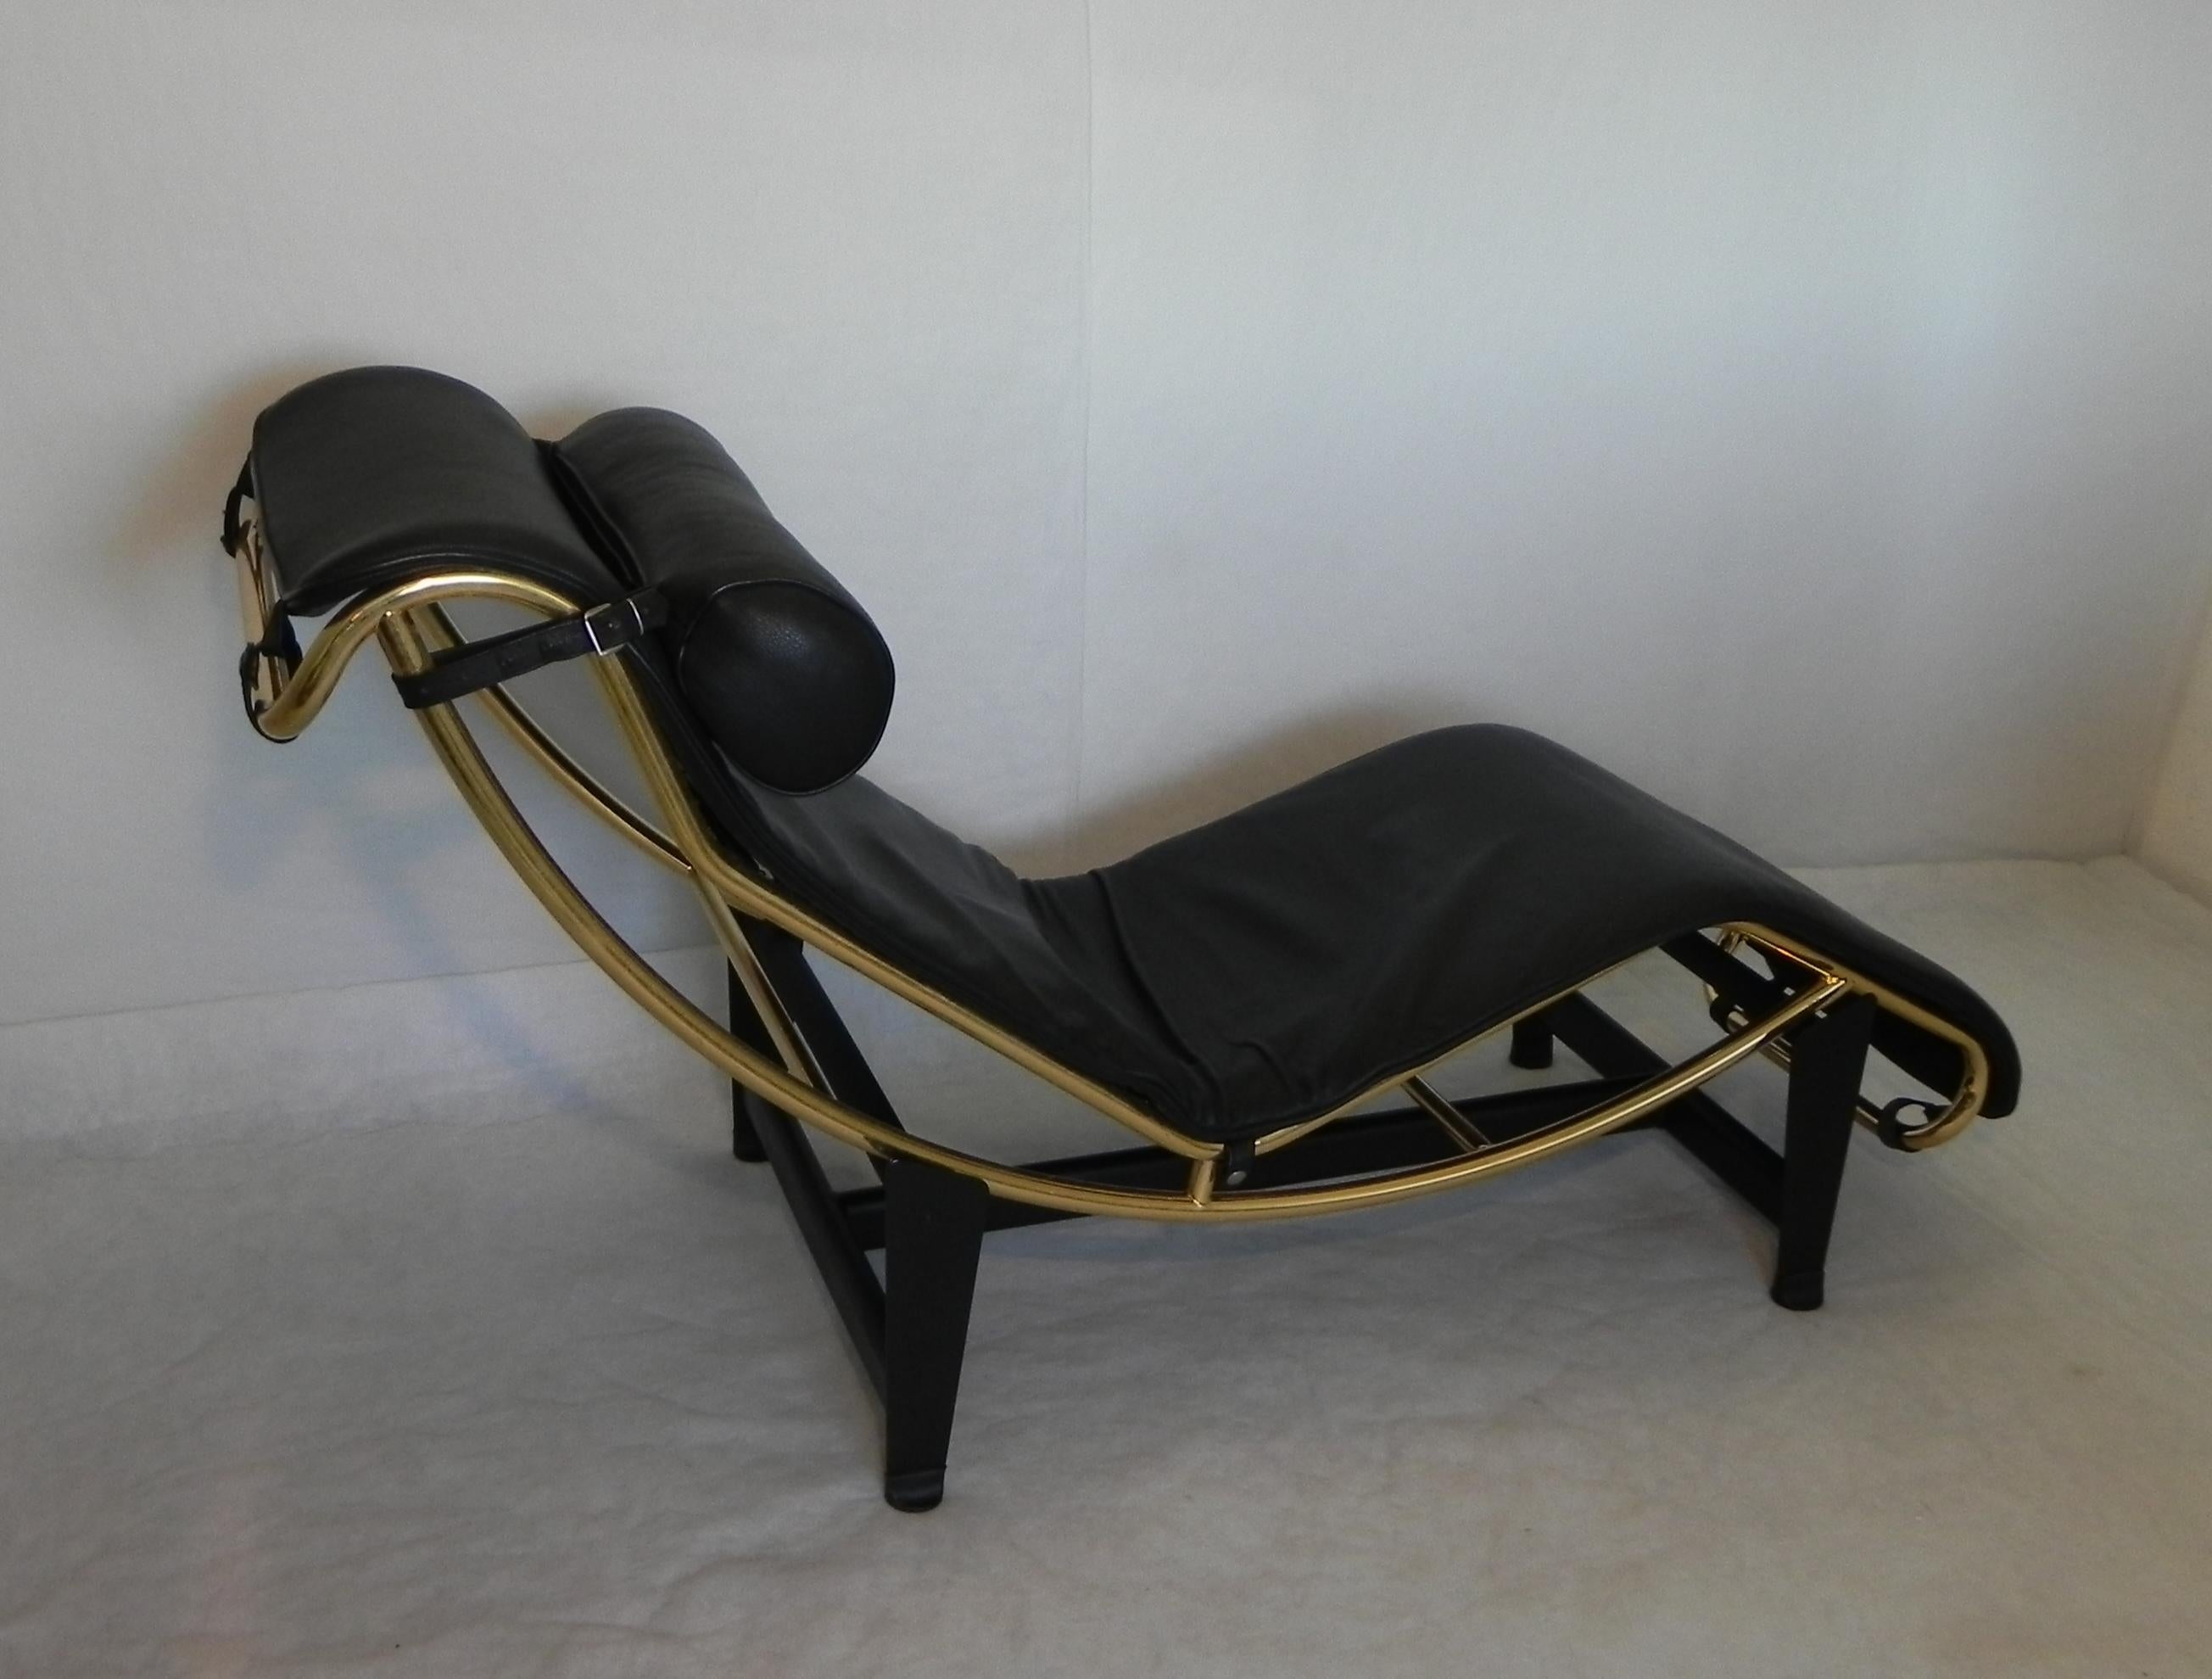 Chaise Longue, limited edition - Gold For Sale 3